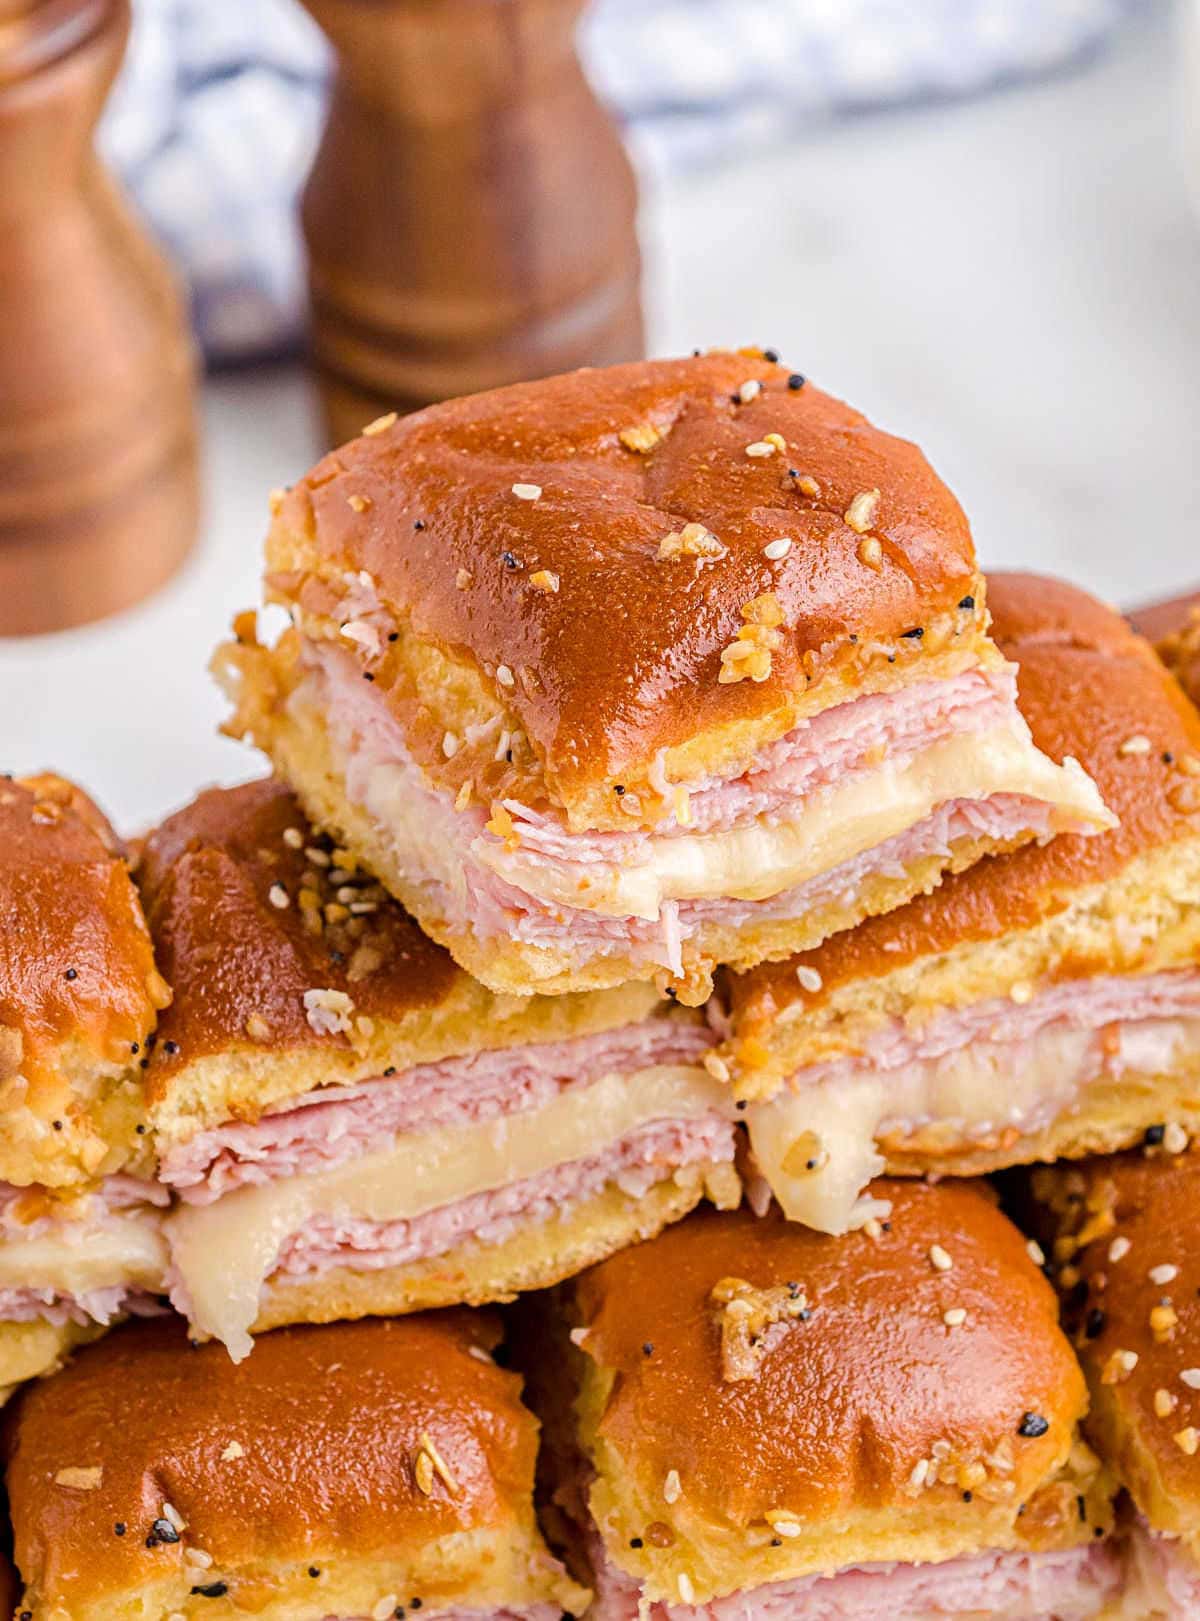 tall stack of hot ham and cheese sliders on serving platter ready to be enjoyed. wood salt and pepper shakers in background next to white and blue checked towel.